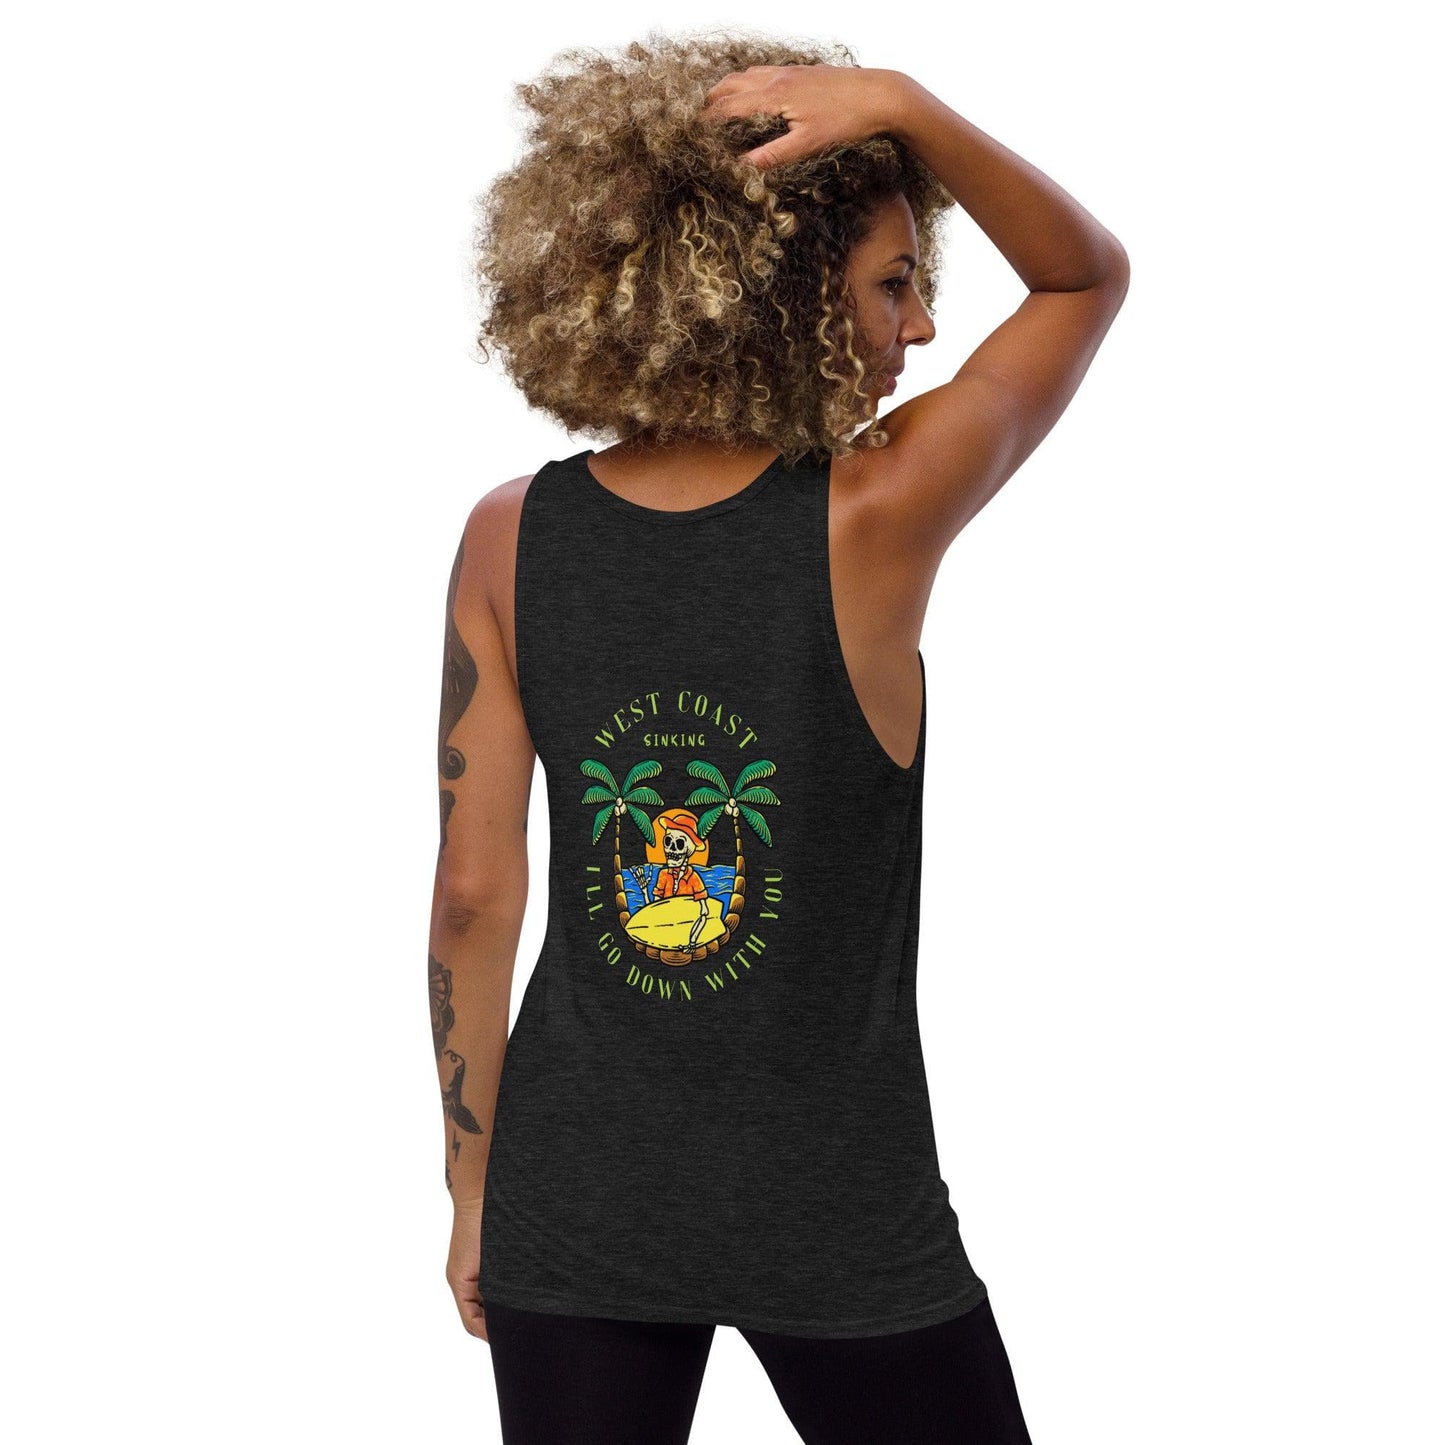 Local Summer Collective Charcoal-Black Triblend / XS West Coast Sinking Unisex Tank Top